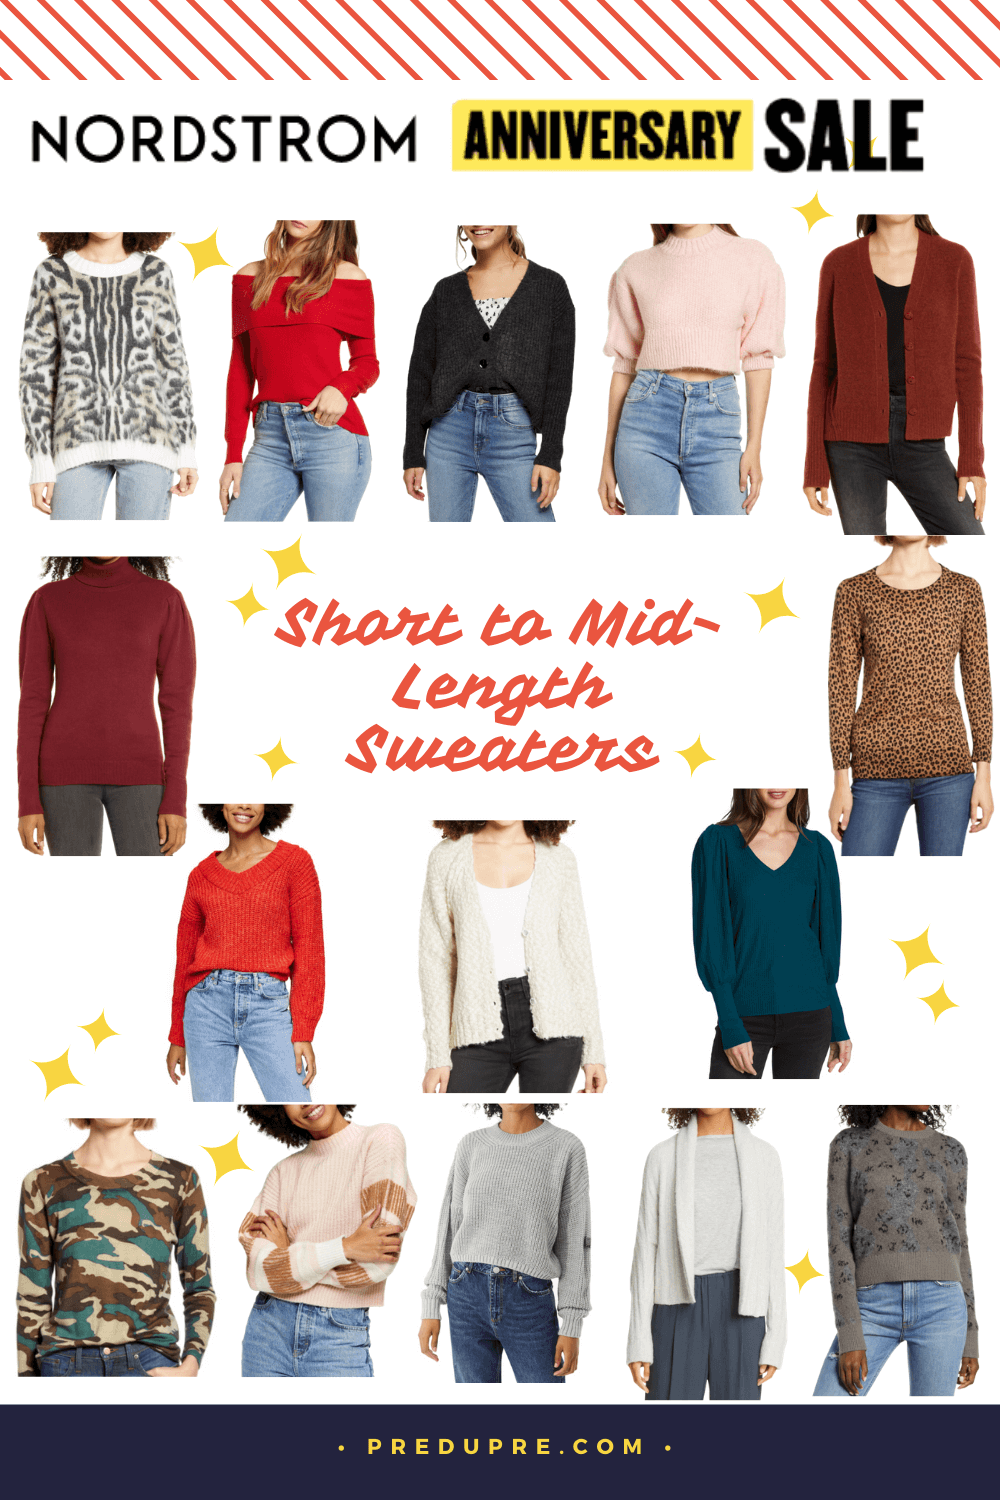 womens cardigan sweaters, women's sweaters on sale, oversized knit sweaters, oversized sweaters, sweaters for juniors, sweaters for women, fall fashion outfits, fall outfits, fall outfit ideas, fall outfits 2020, fall outfit ideas 2020, fall clothes, what to wear in fall, fall cardigans, cardigan sweater, nordstrom cardigan women's, open front cardigan, cardigan sweater women’s, boyfriend cardigan sweater, cardigans for juniors, sweater duster, women’s plaid shirt, fall transition, off the shoulder sweaters, pull over sweater women’s